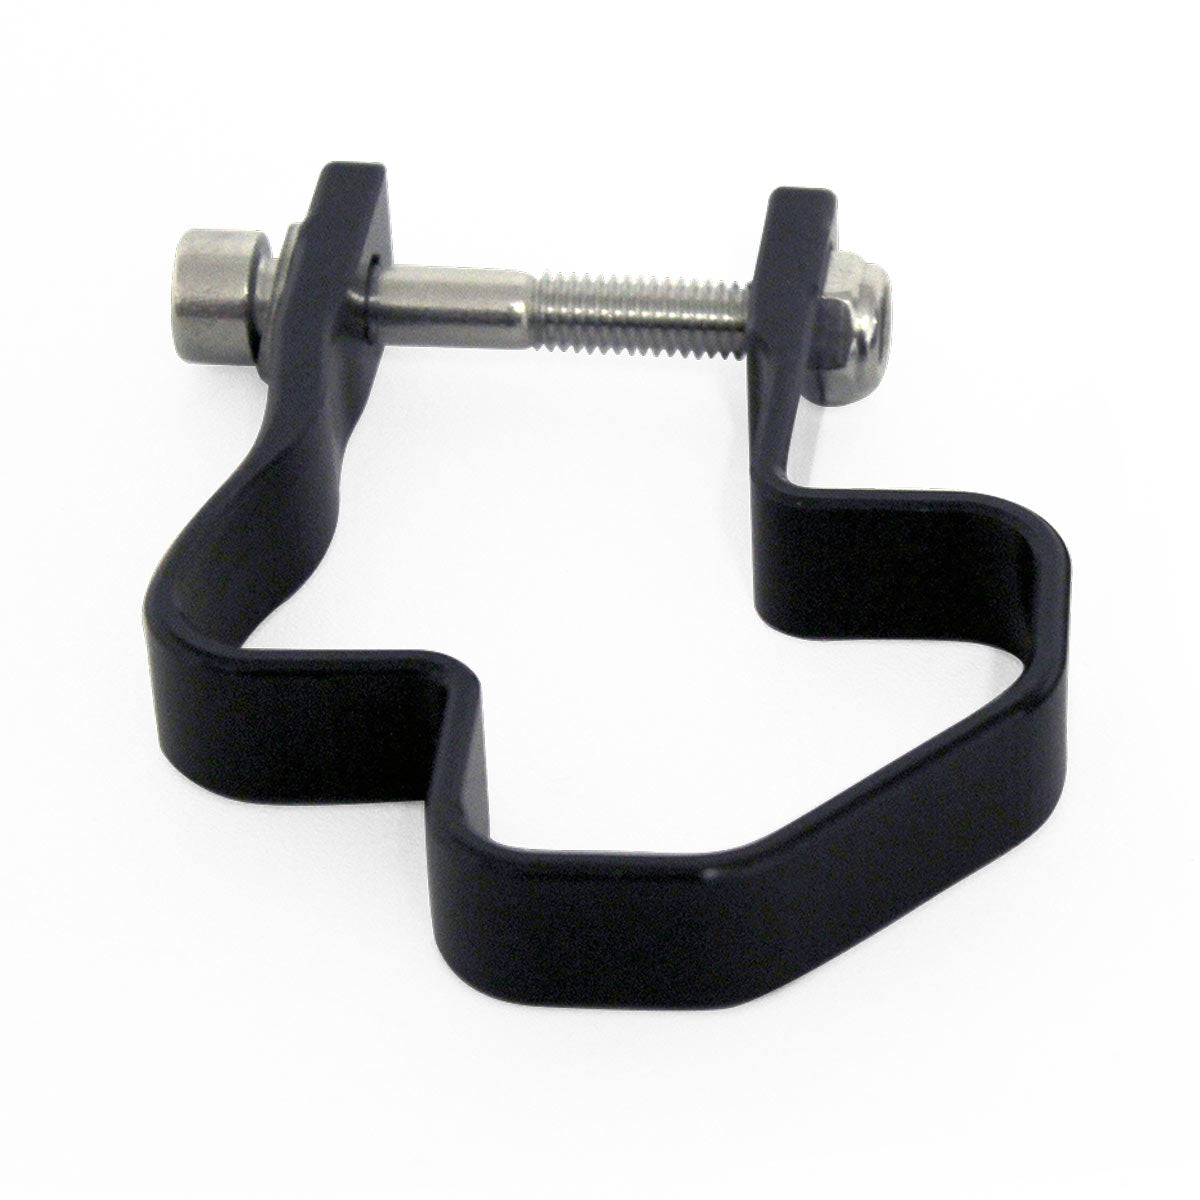 Outward Profile Cage Clamp